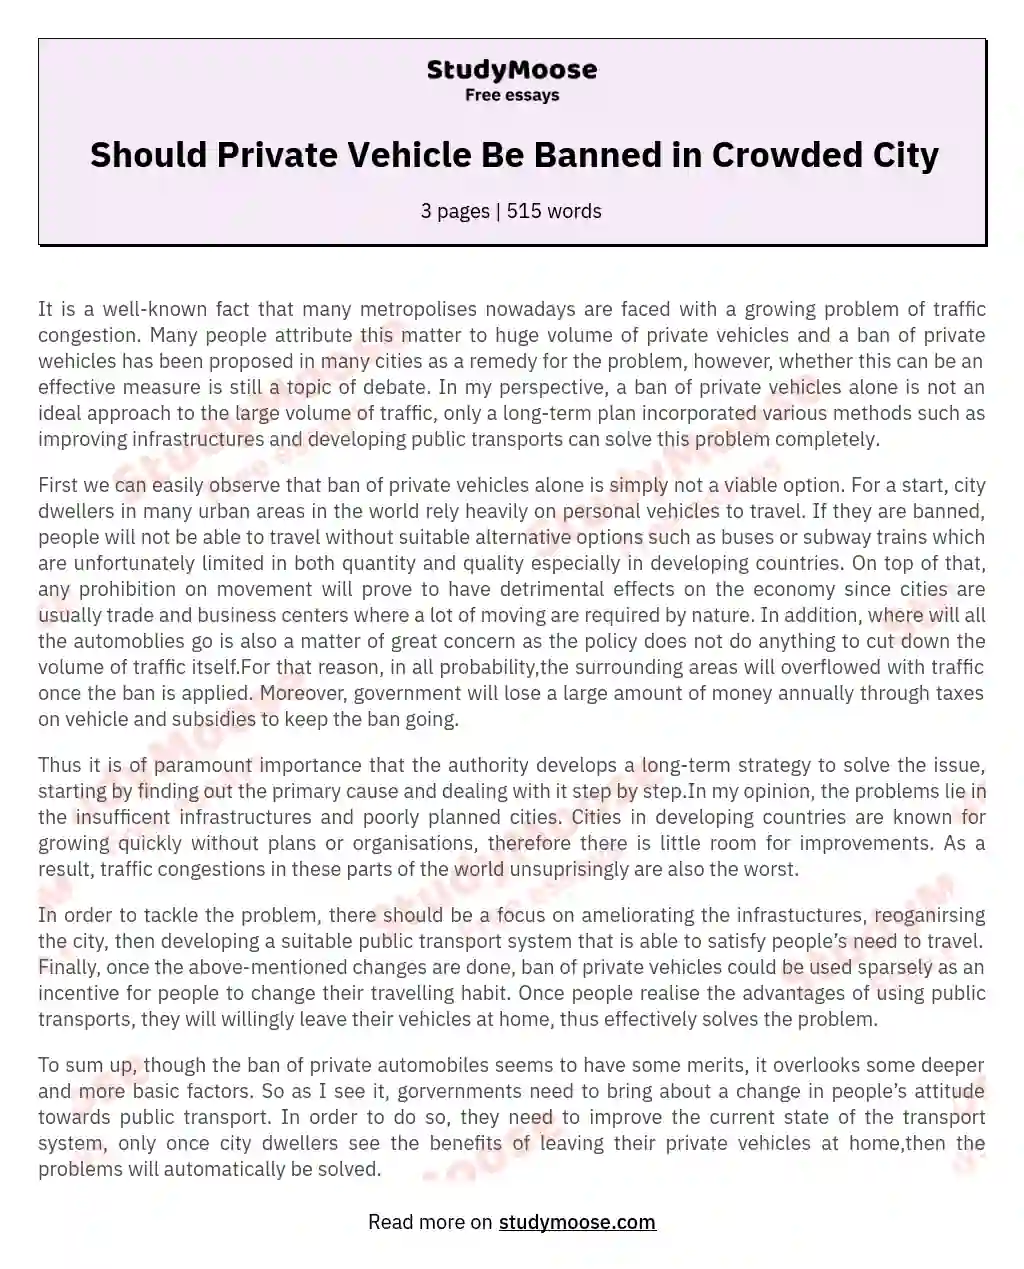 Should Private Vehicle Be Banned in Crowded City essay